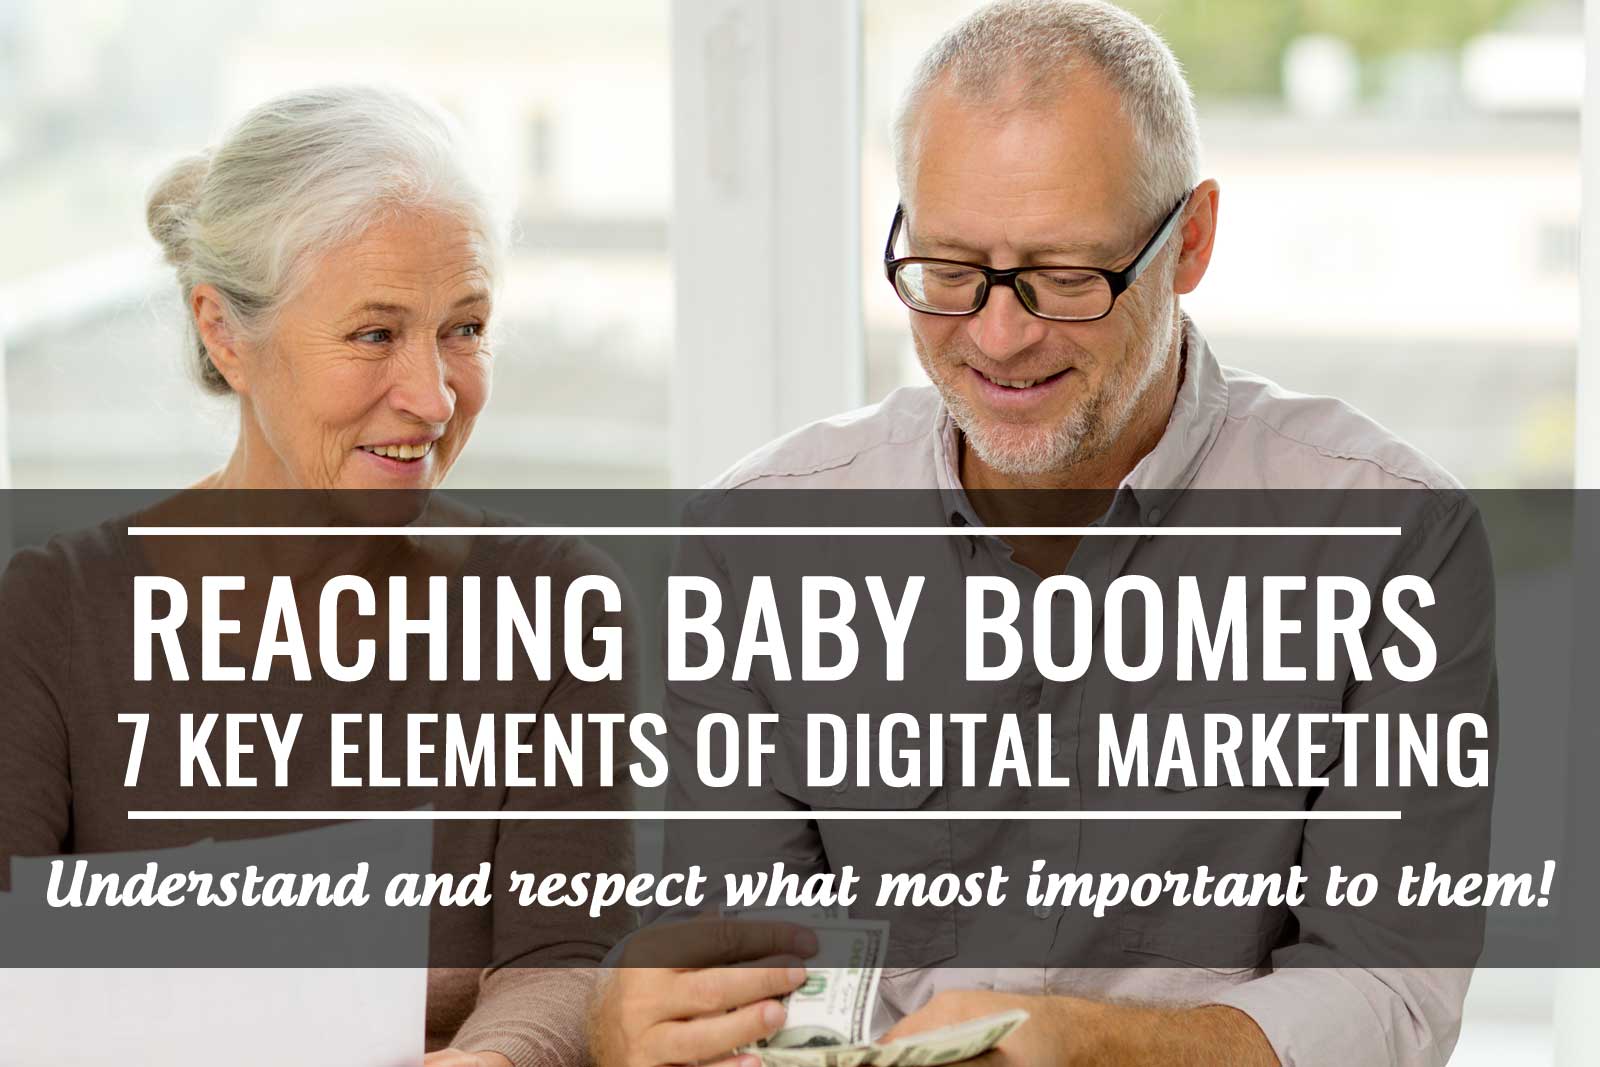 marketing to baby boomers example